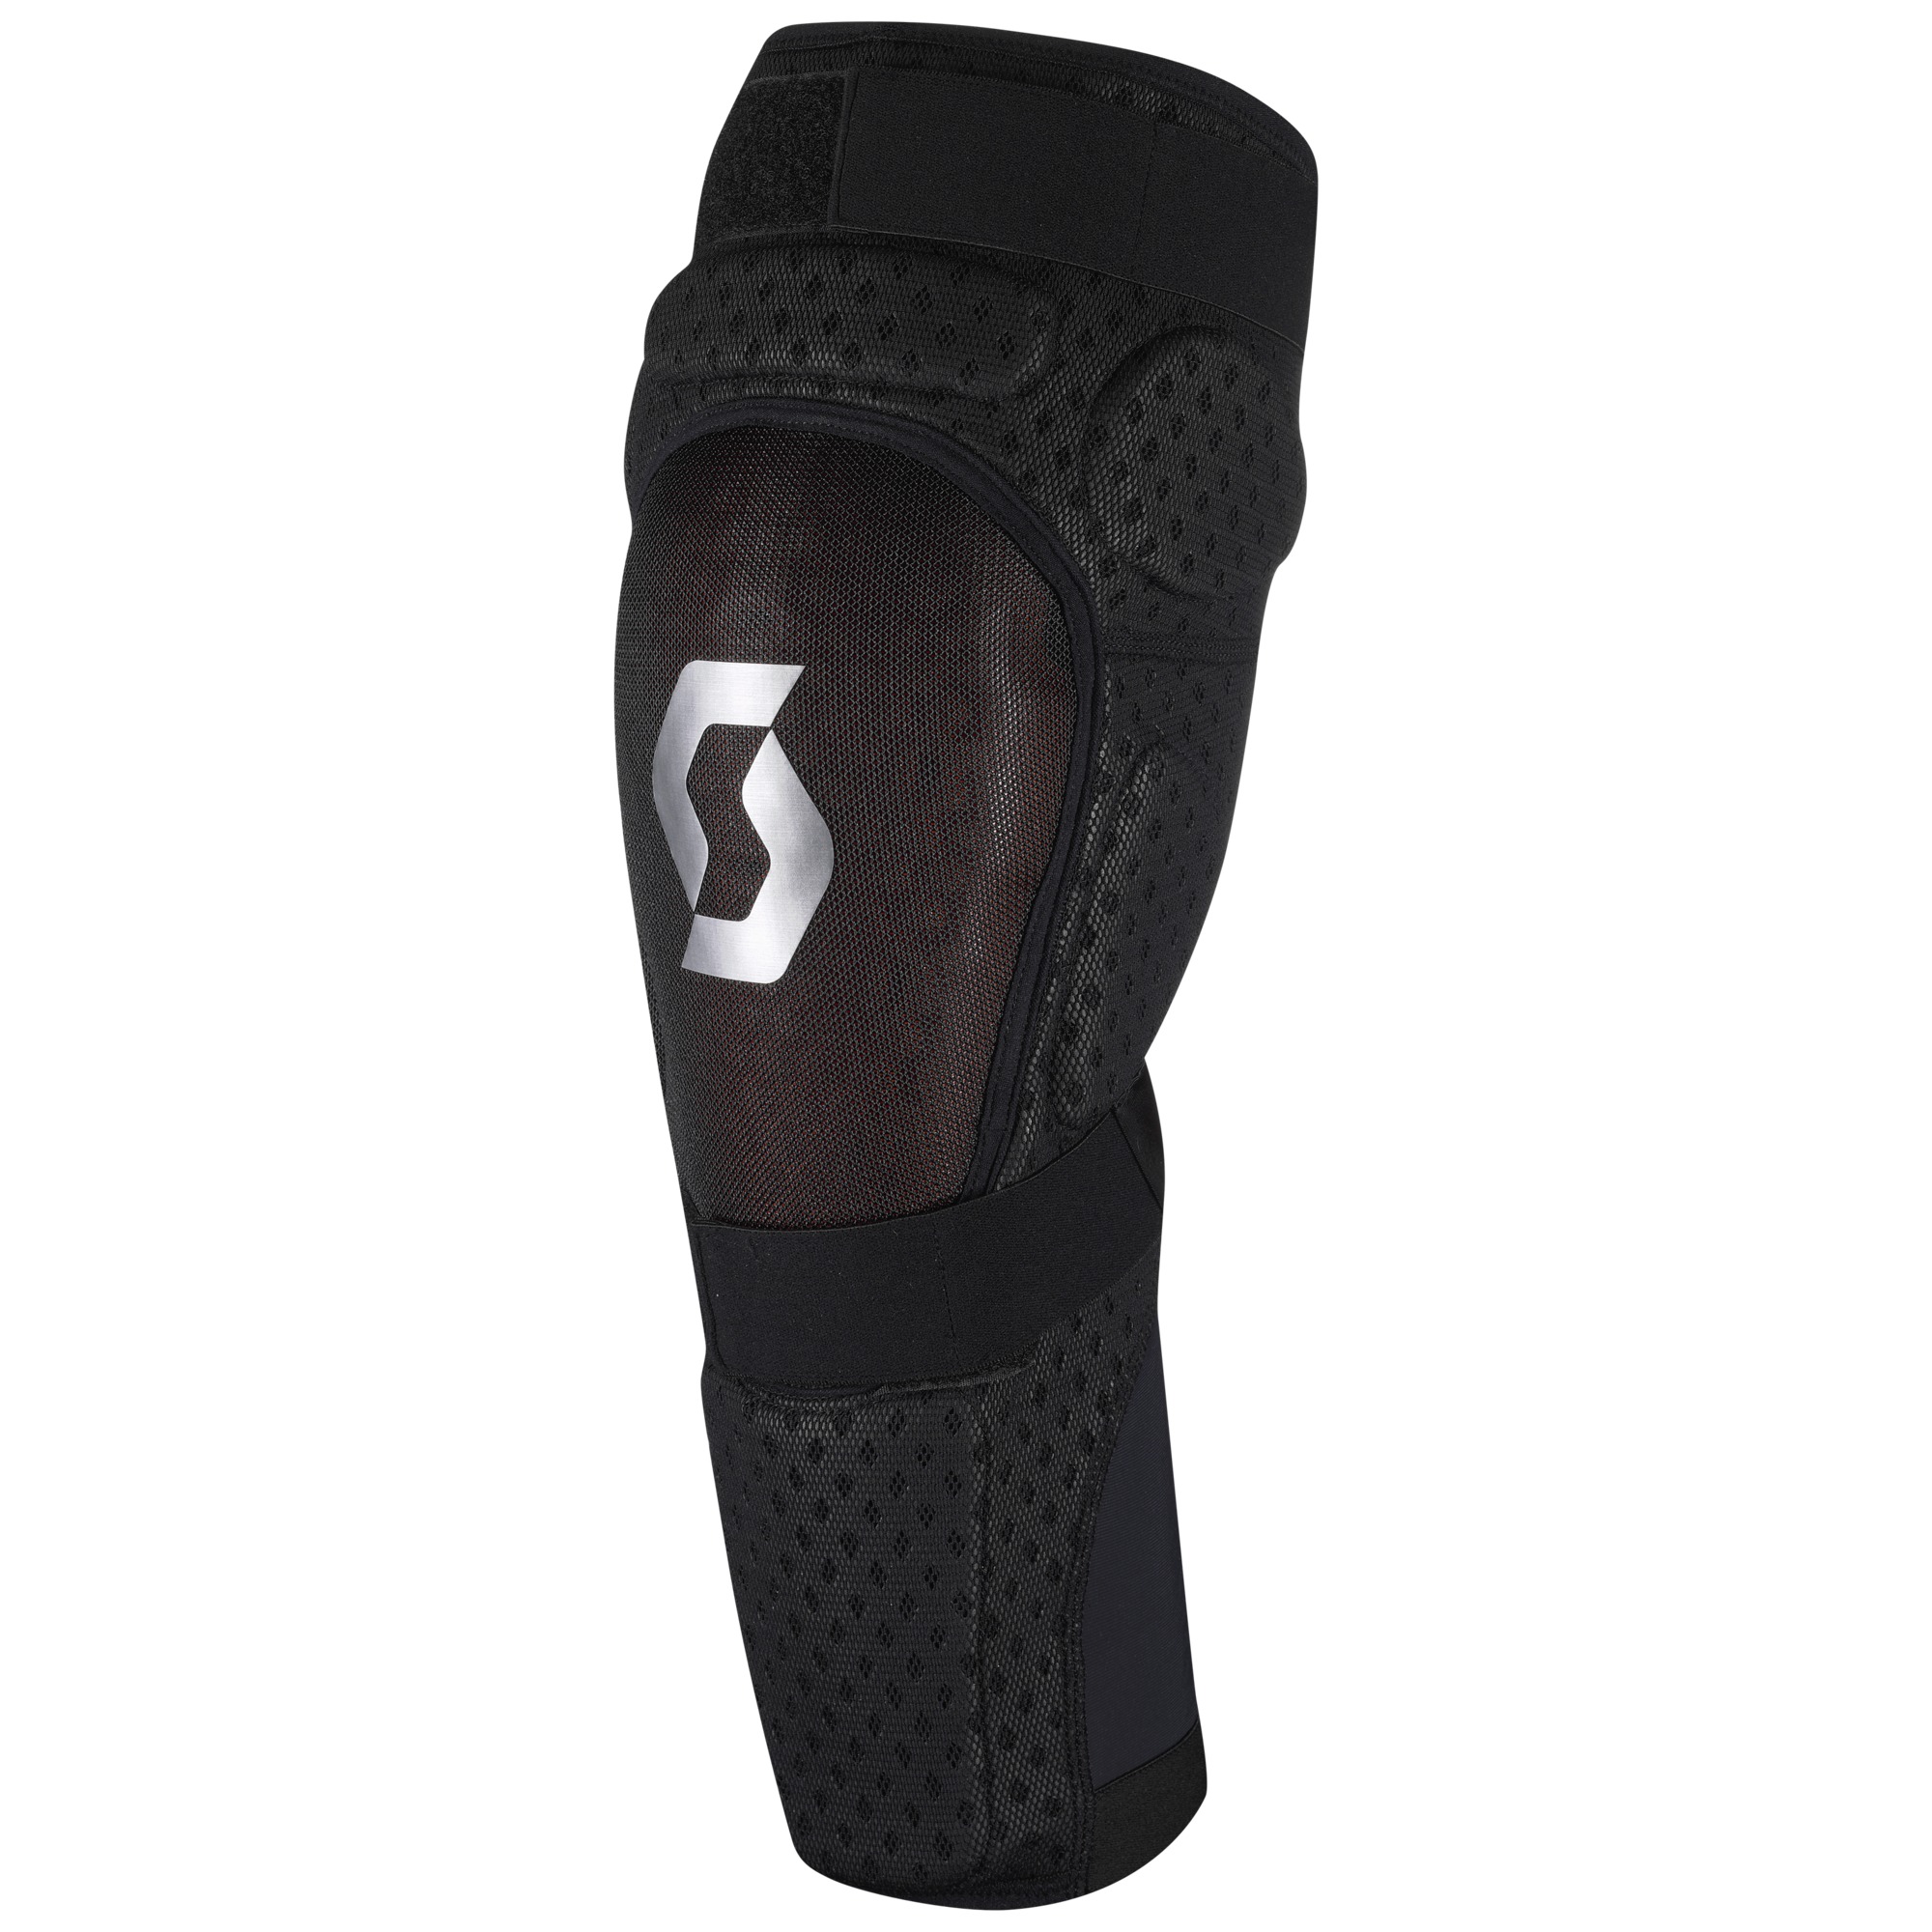 Ginocchiere motocross softcon 2